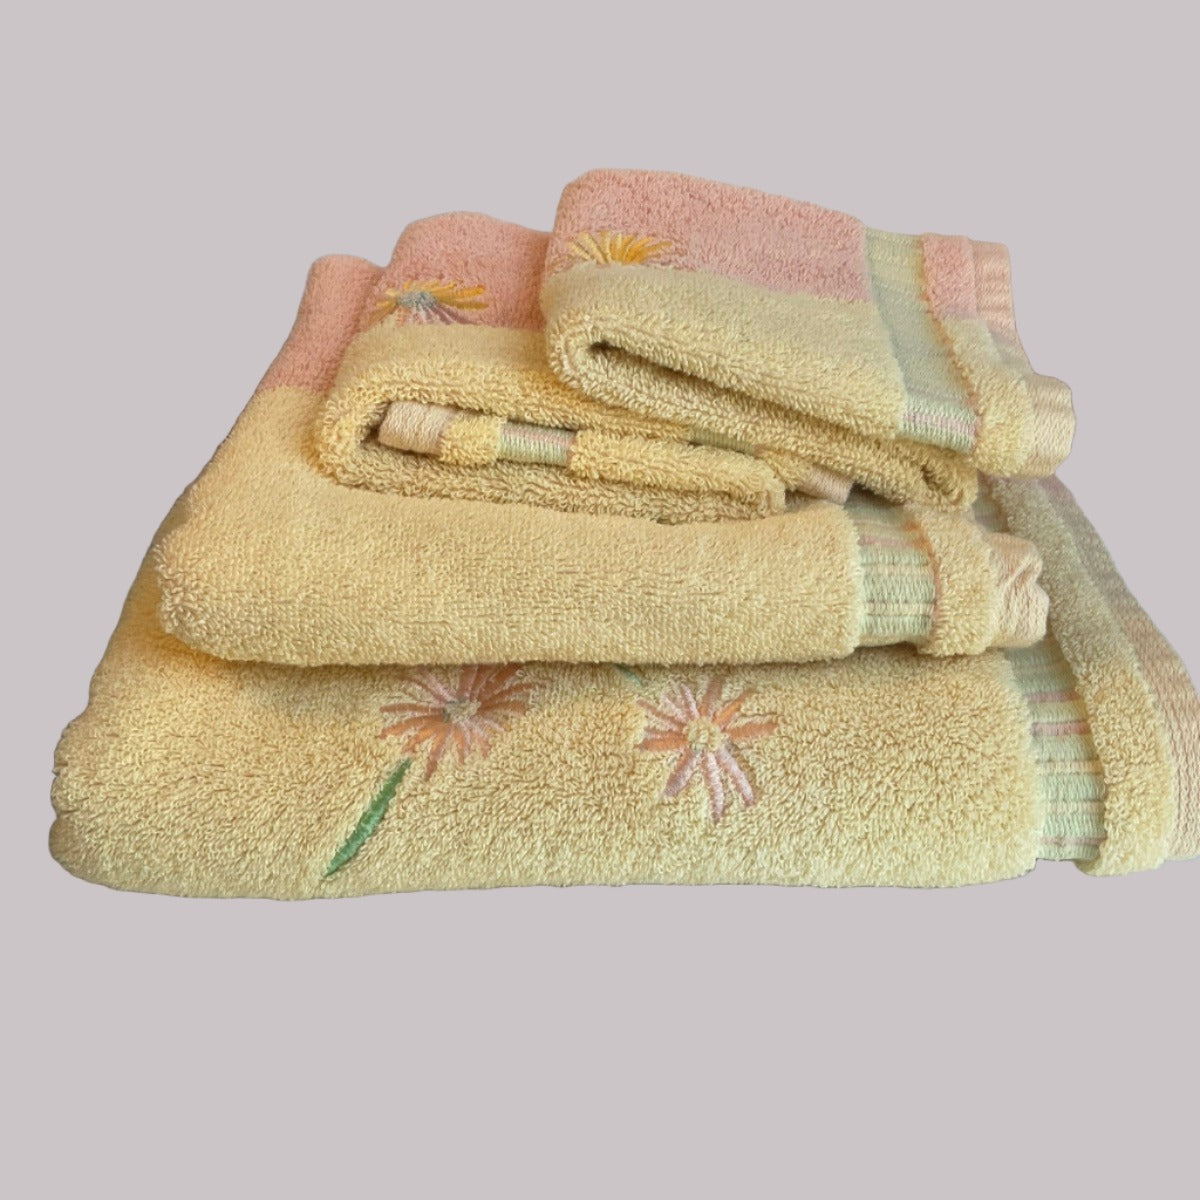 Decorate Bathroom Towels Peach & Yellow Daisy Floral - Yellow Side